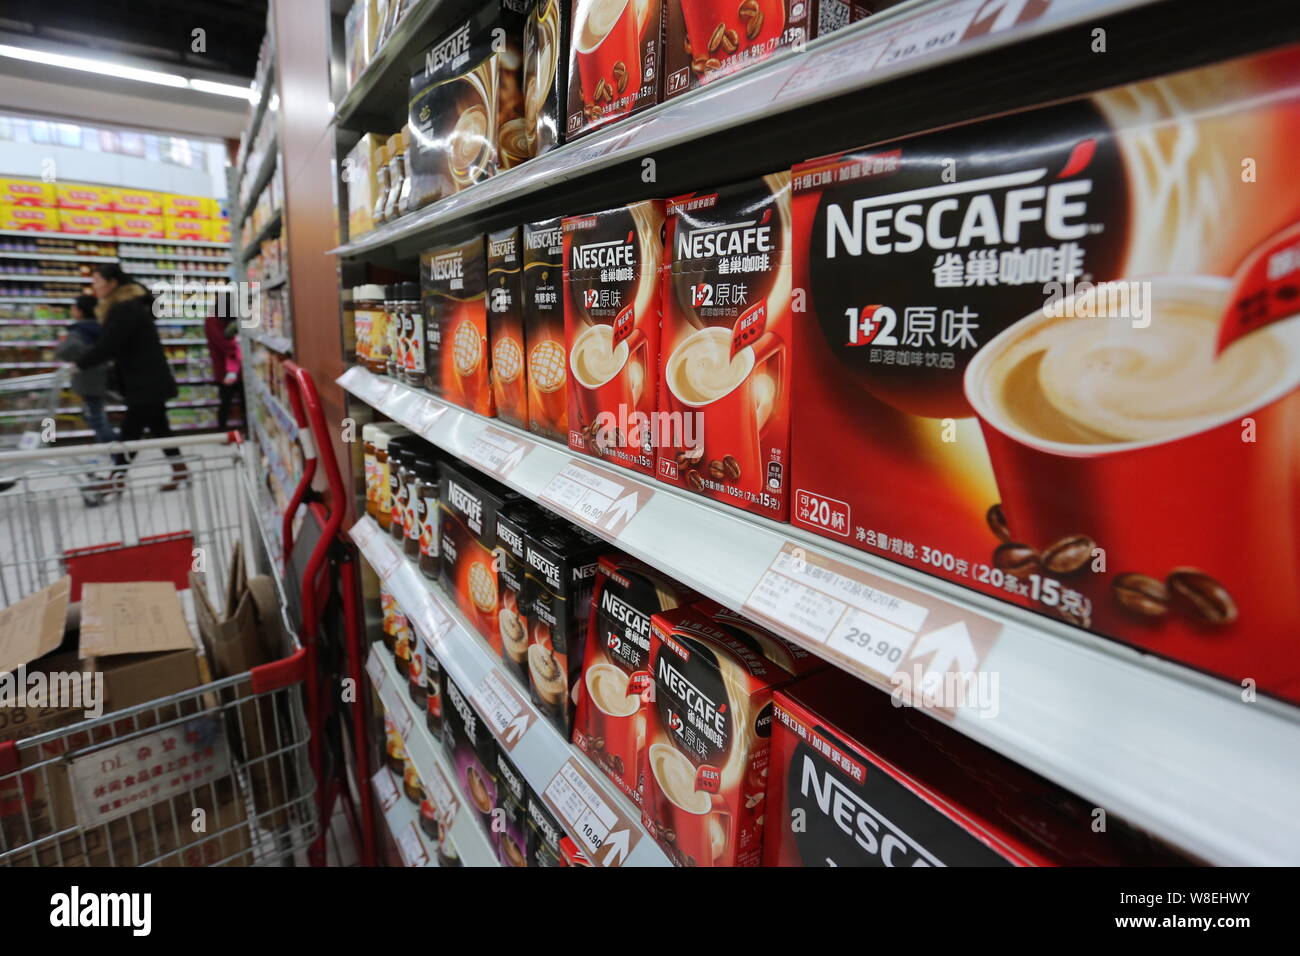 https://c8.alamy.com/comp/W8EHWY/file-cartons-of-nescafe-instant-coffee-of-nestle-are-for-sale-at-a-supermarket-in-xuchang-city-central-chinas-henan-province-7-december-2014-W8EHWY.jpg